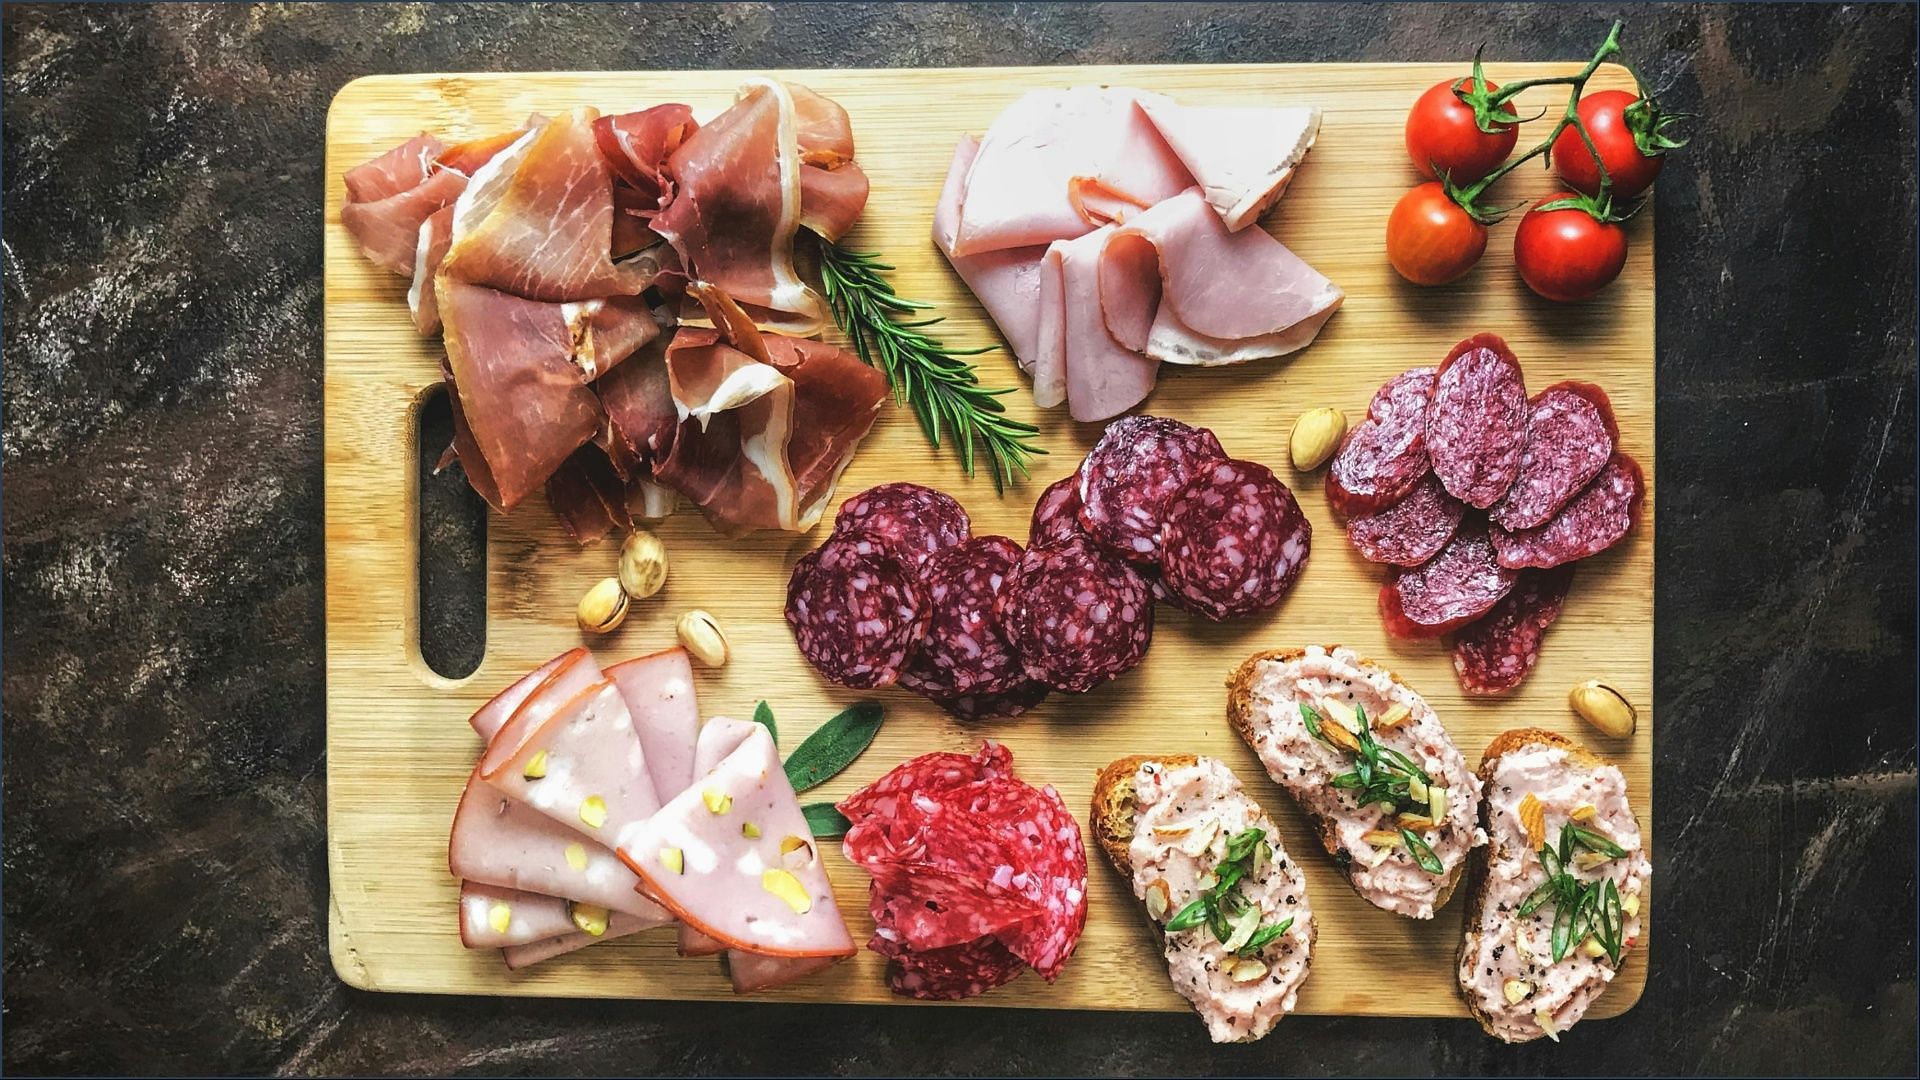 The affected ready-to-eat Charcuterie meat products may be underprocessed (Image via Nicolas Postiglioni / Pexels)